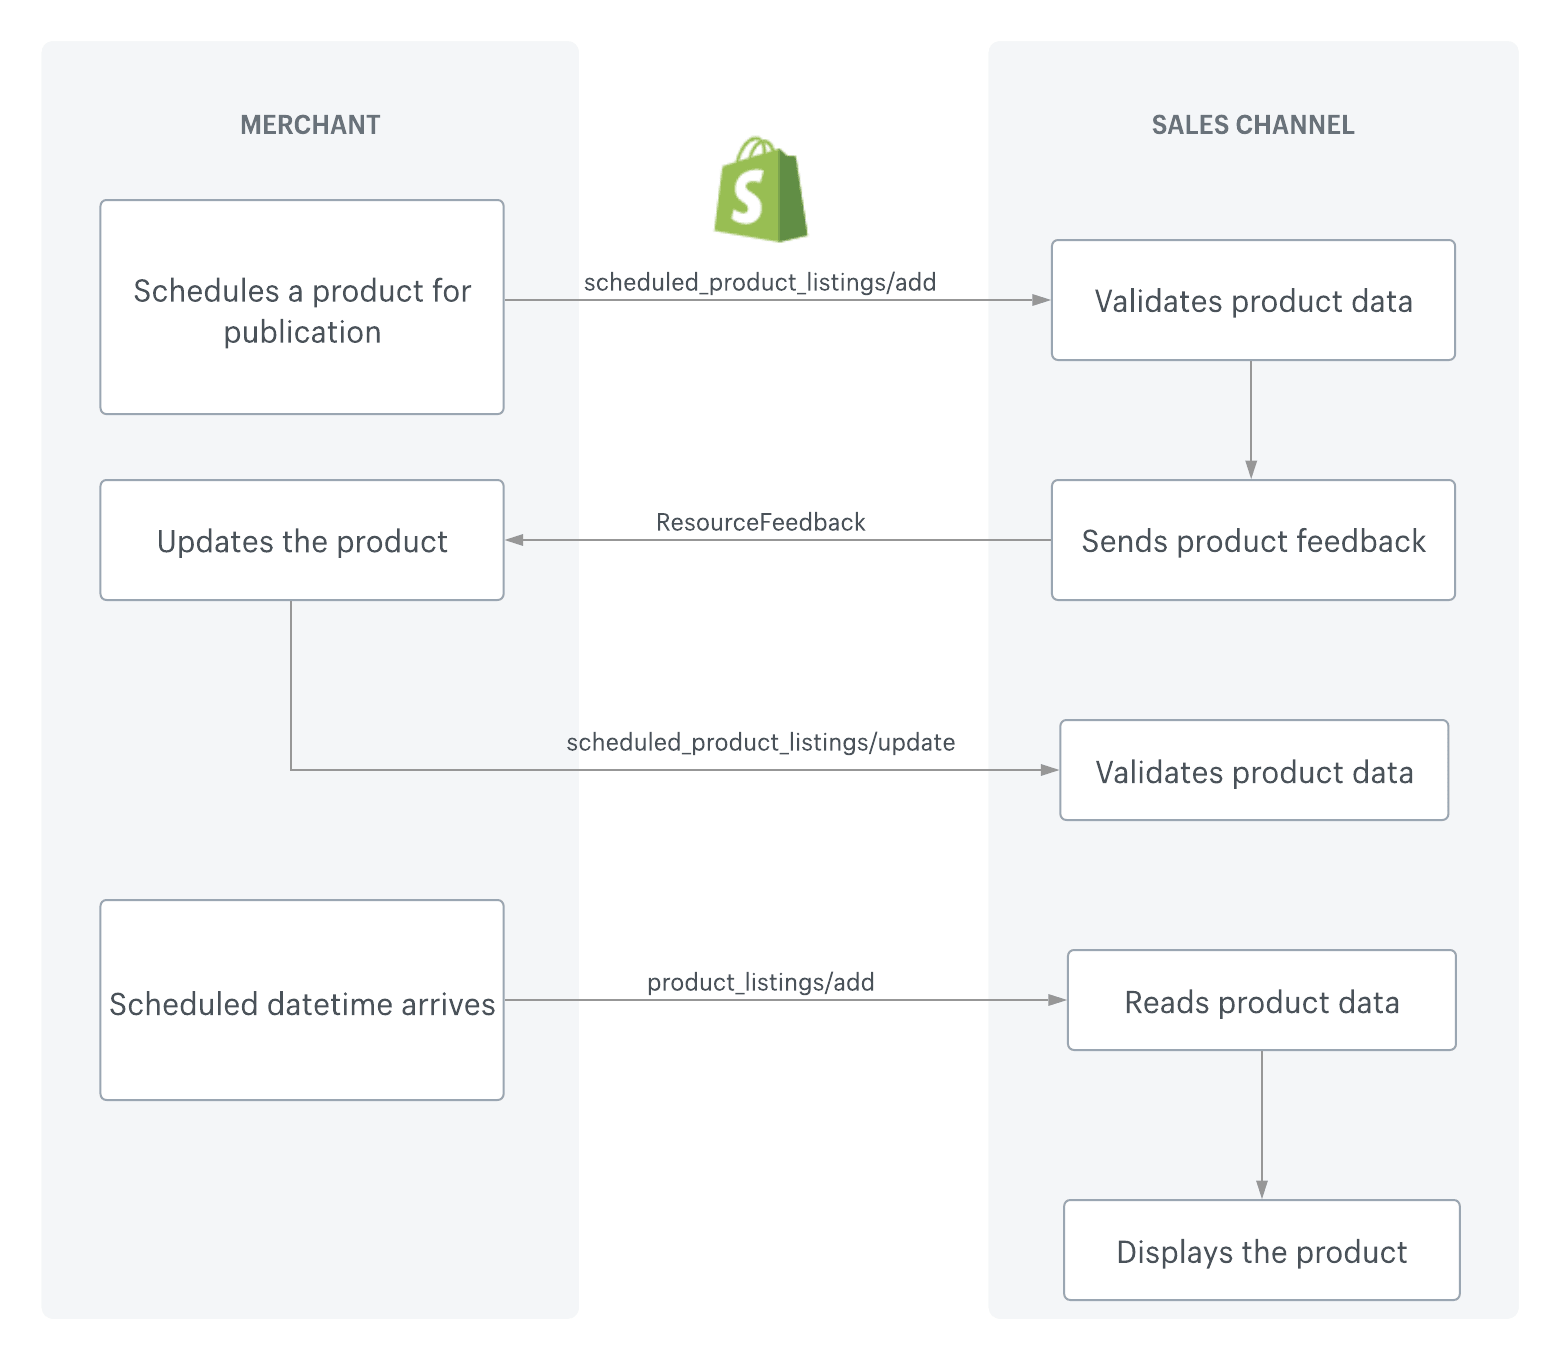 An image of the scheduled publishing workflow